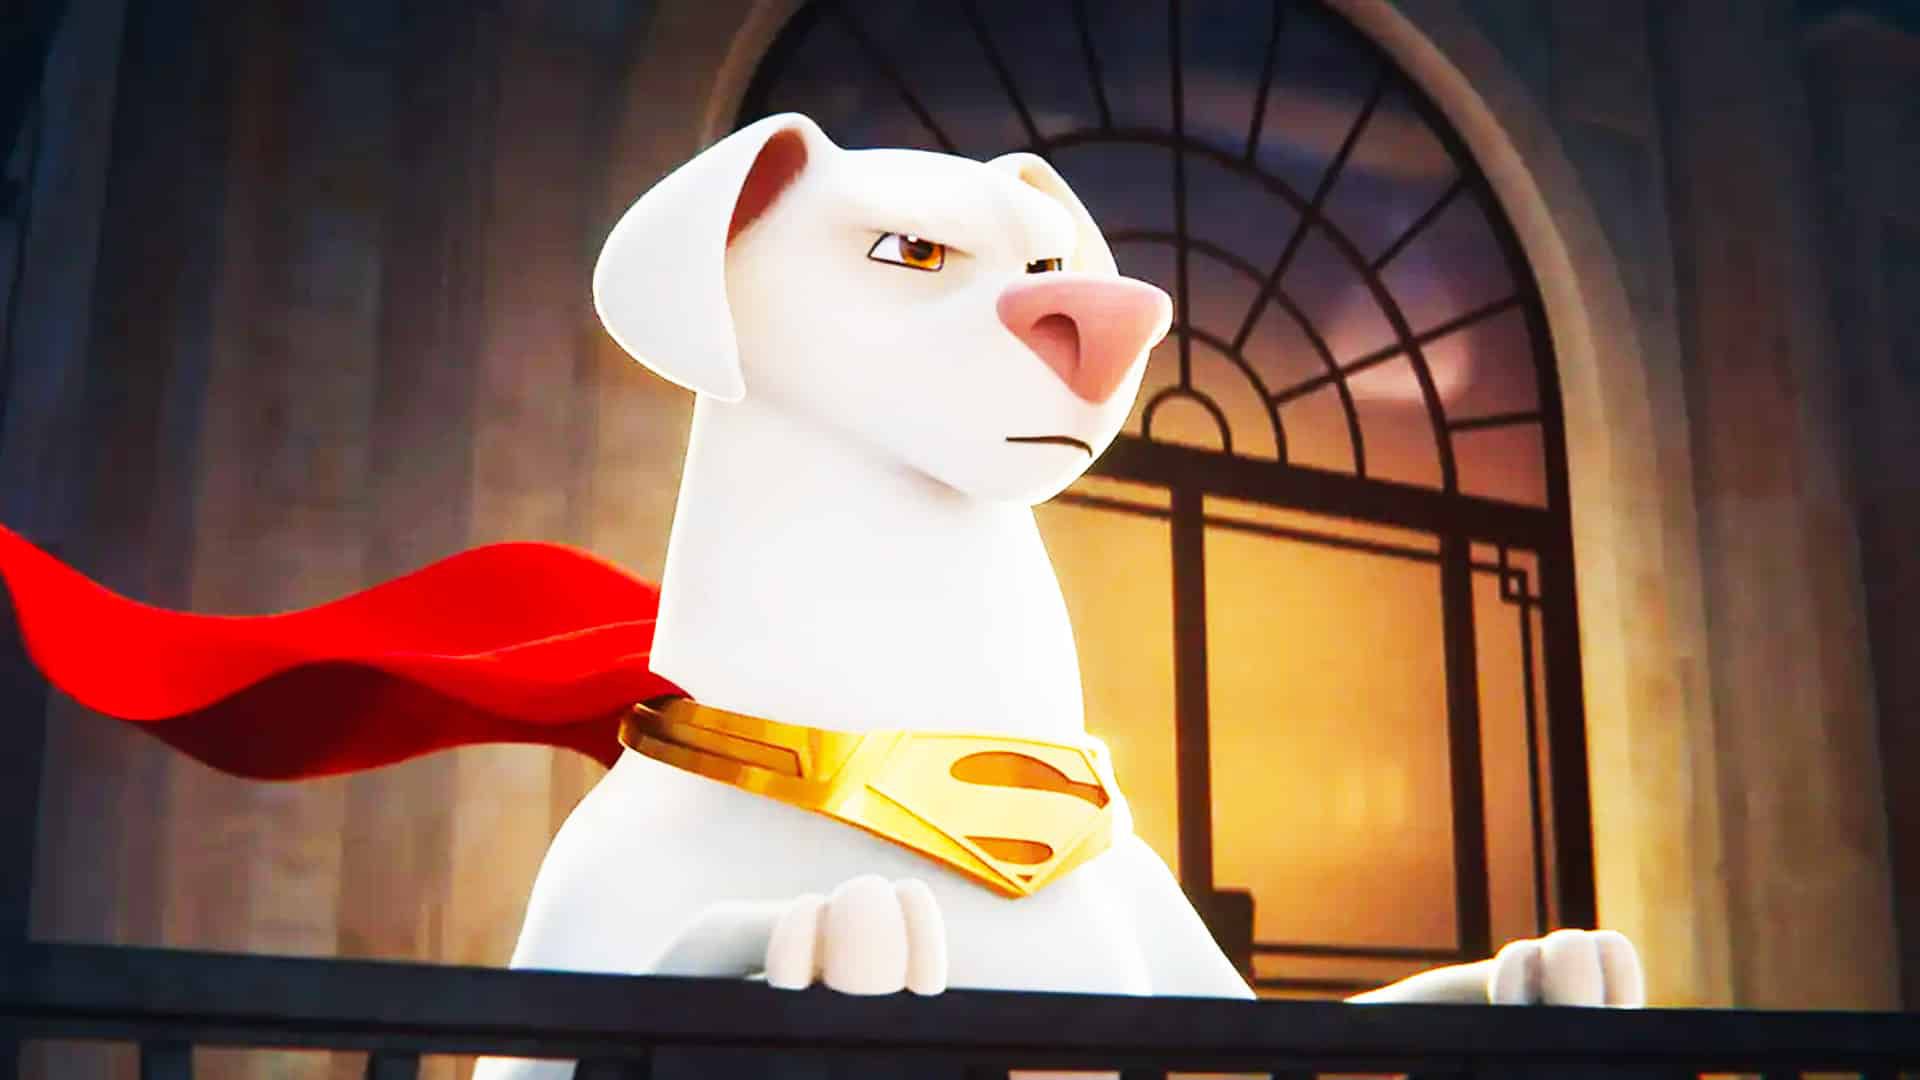 The 8 Greatest Superhero Dogs of All Time Ranked